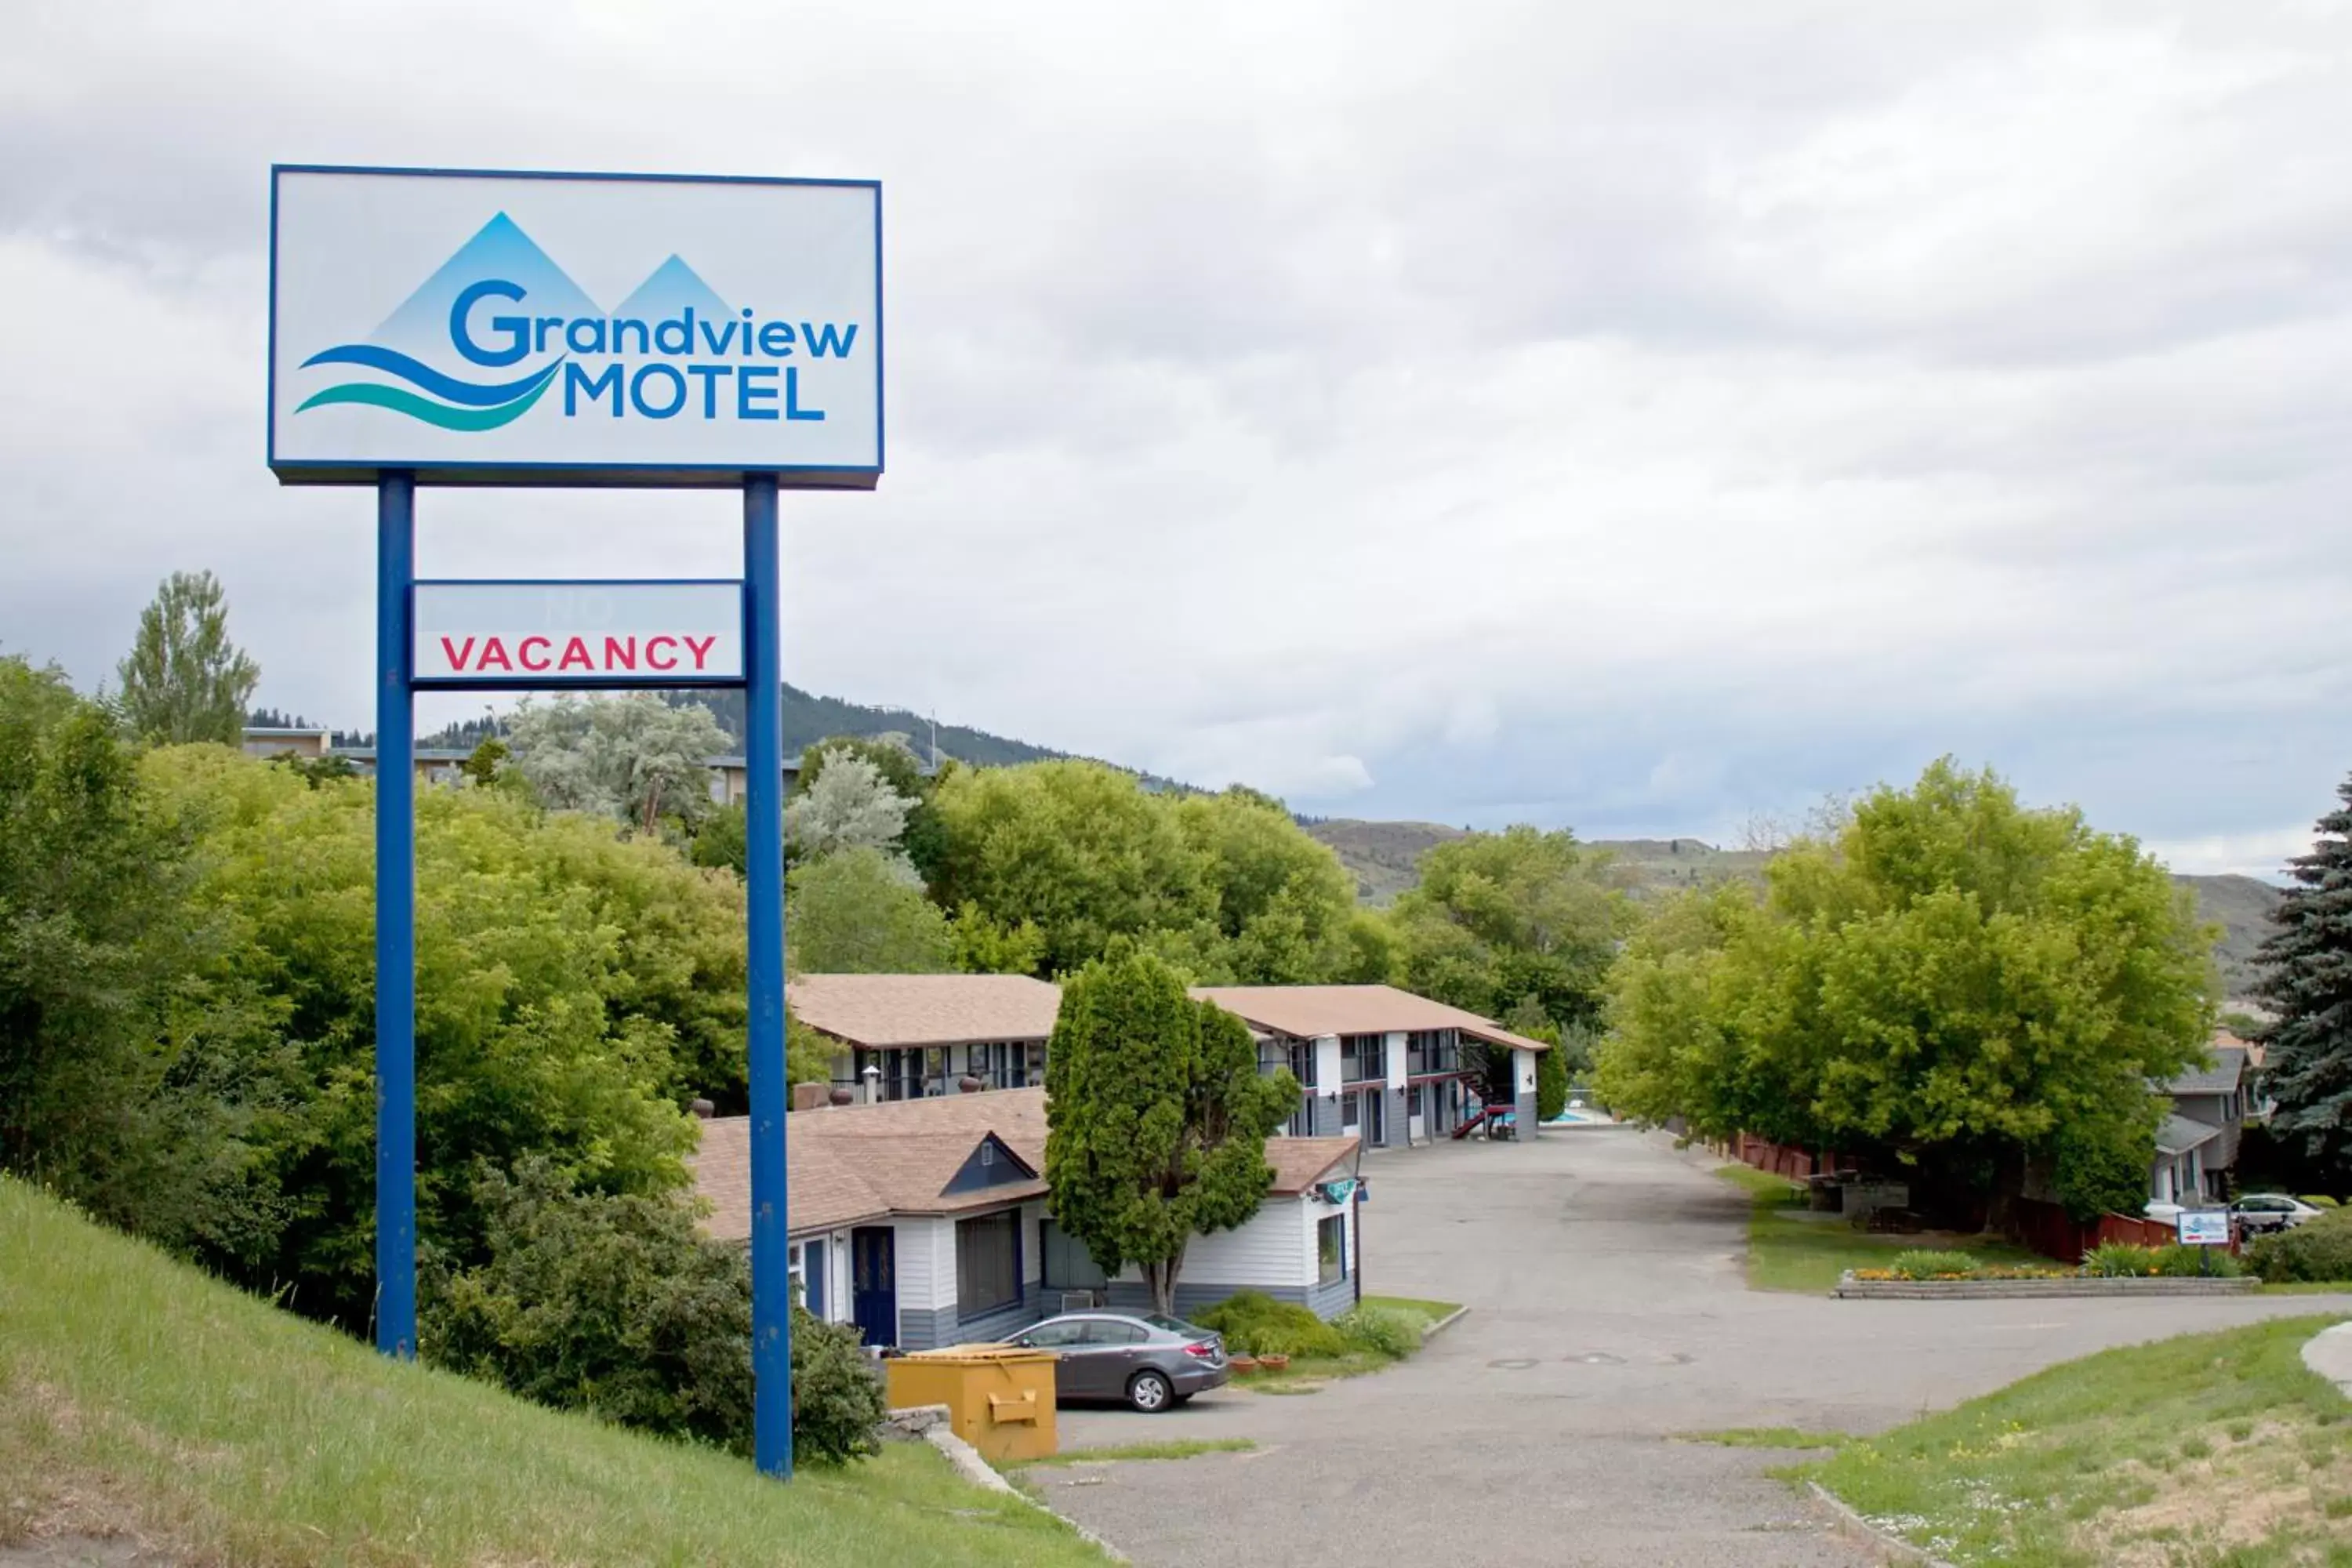 Property logo or sign, View in Grandview Motel